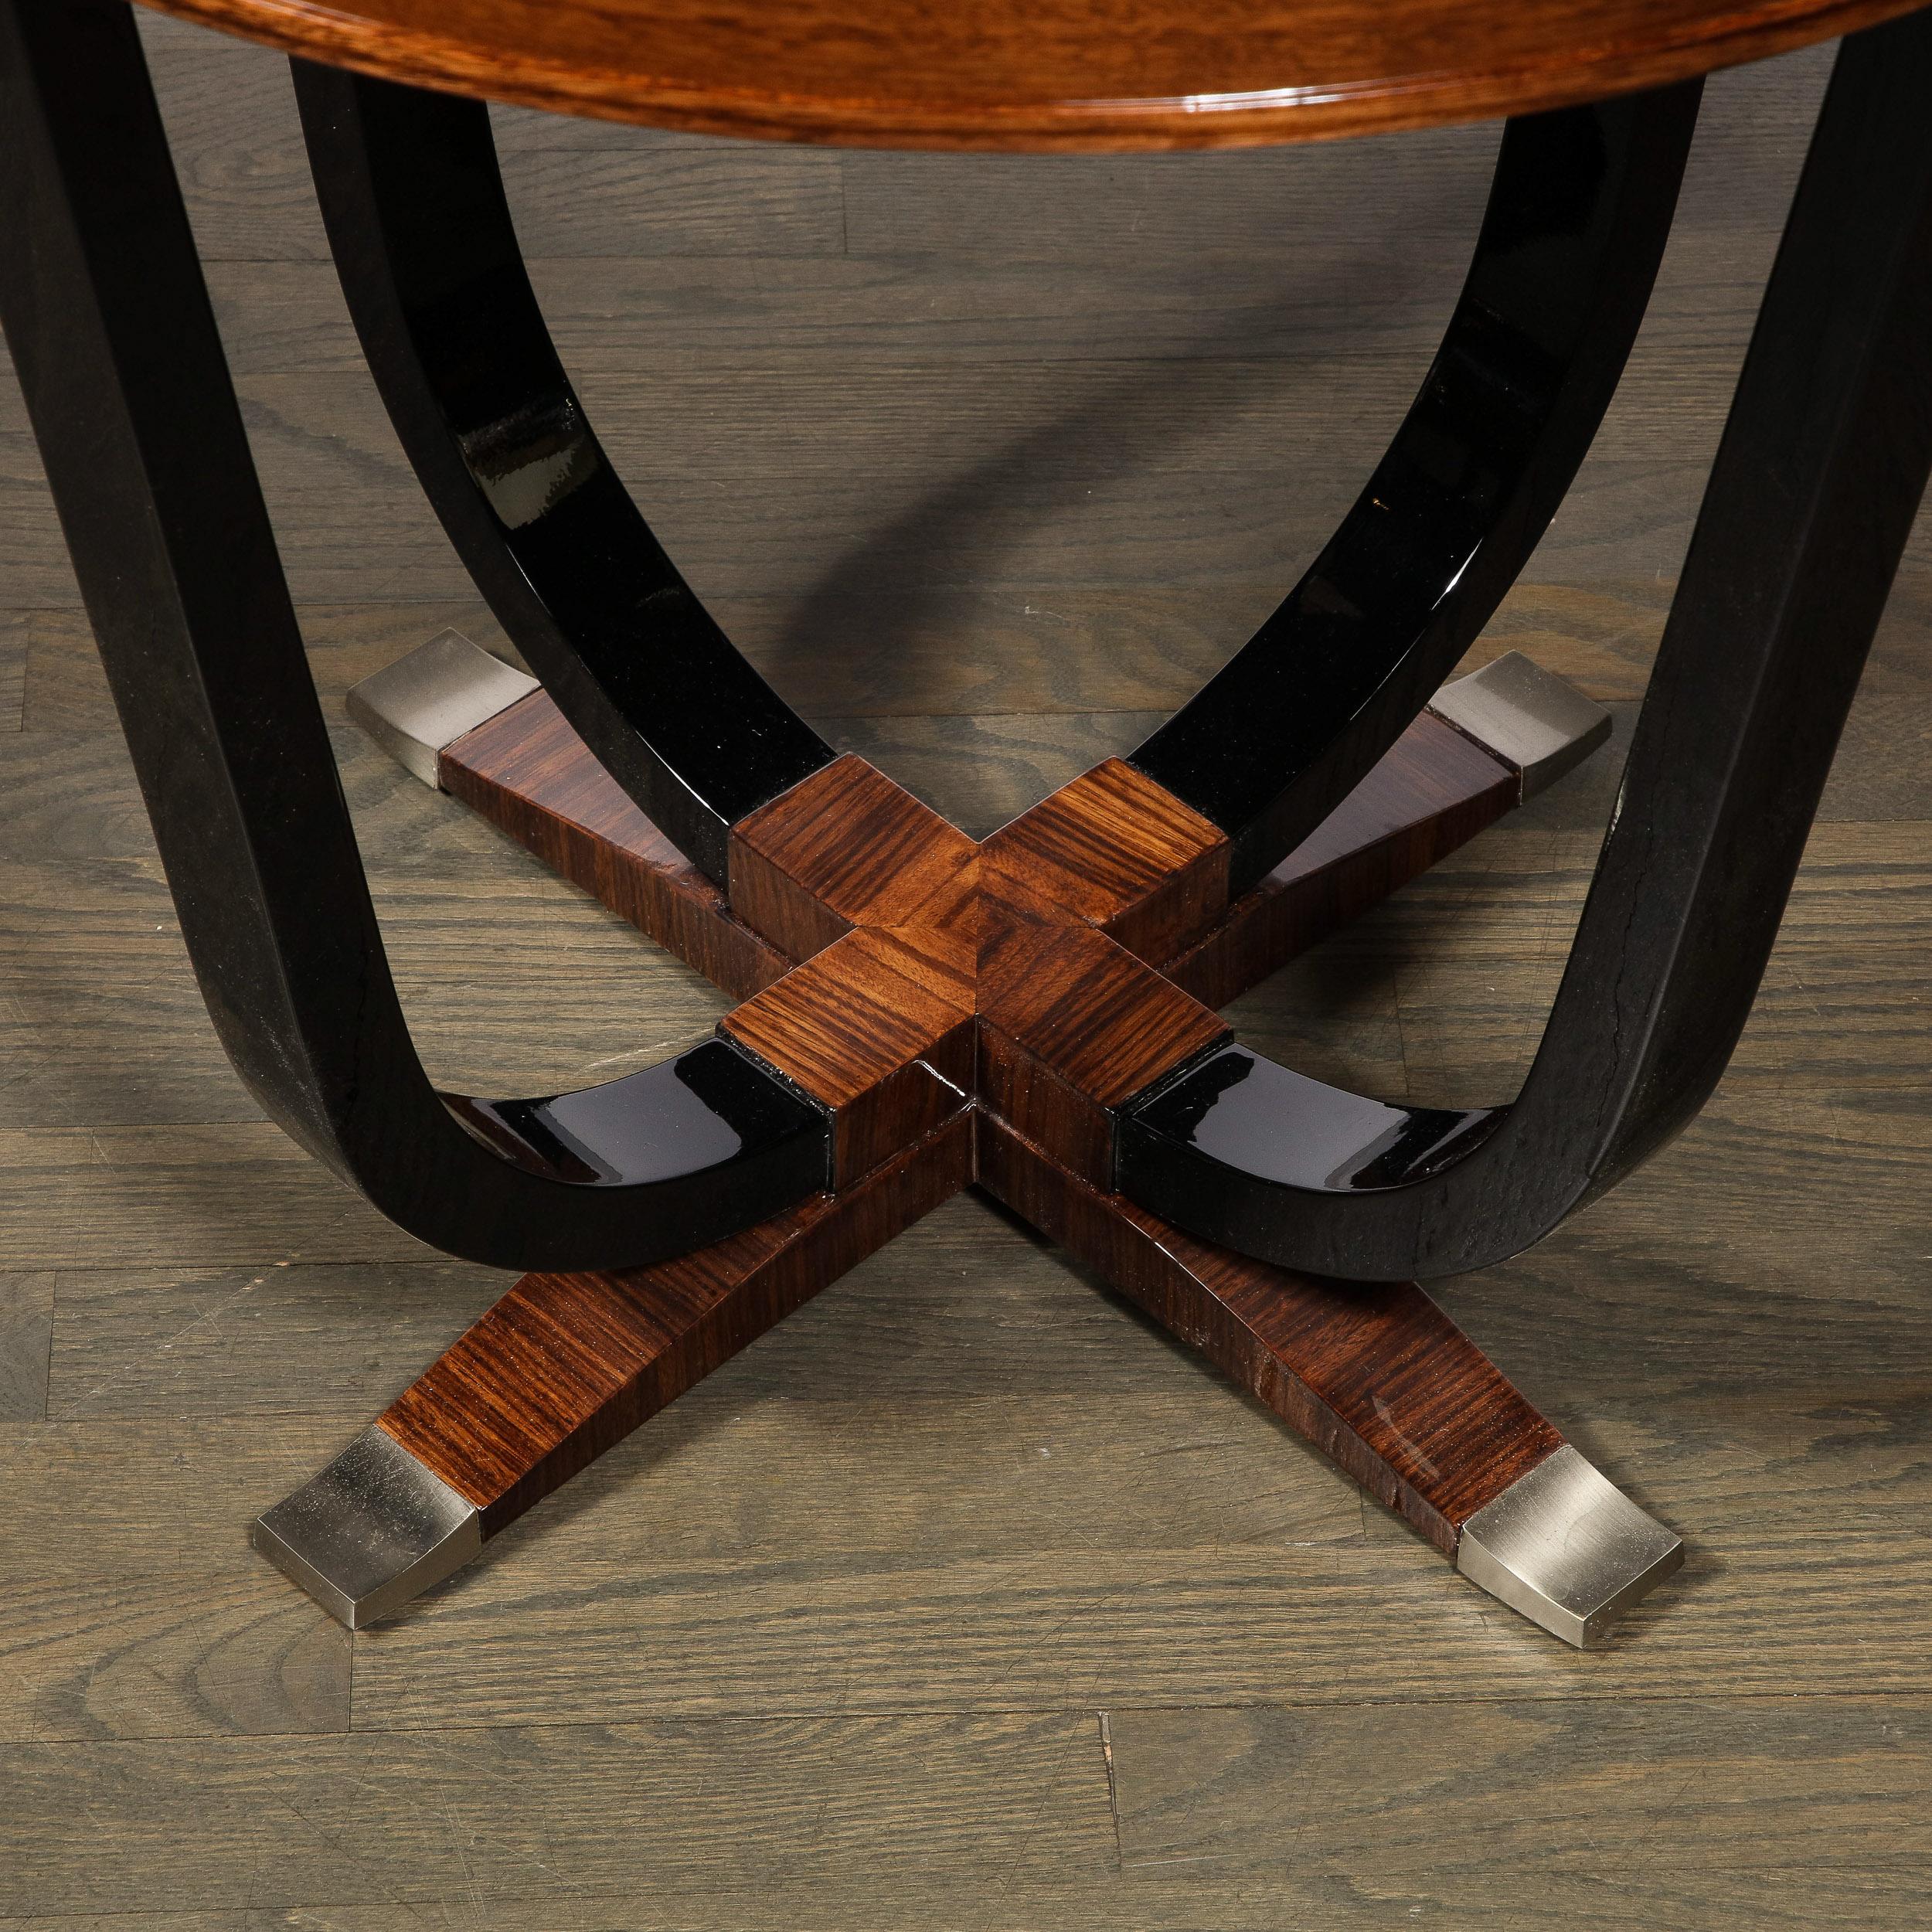 Art Deco Gueridon Table in Book-Matched Walnut, Lacquered Legs & Nickel Sabots For Sale 2